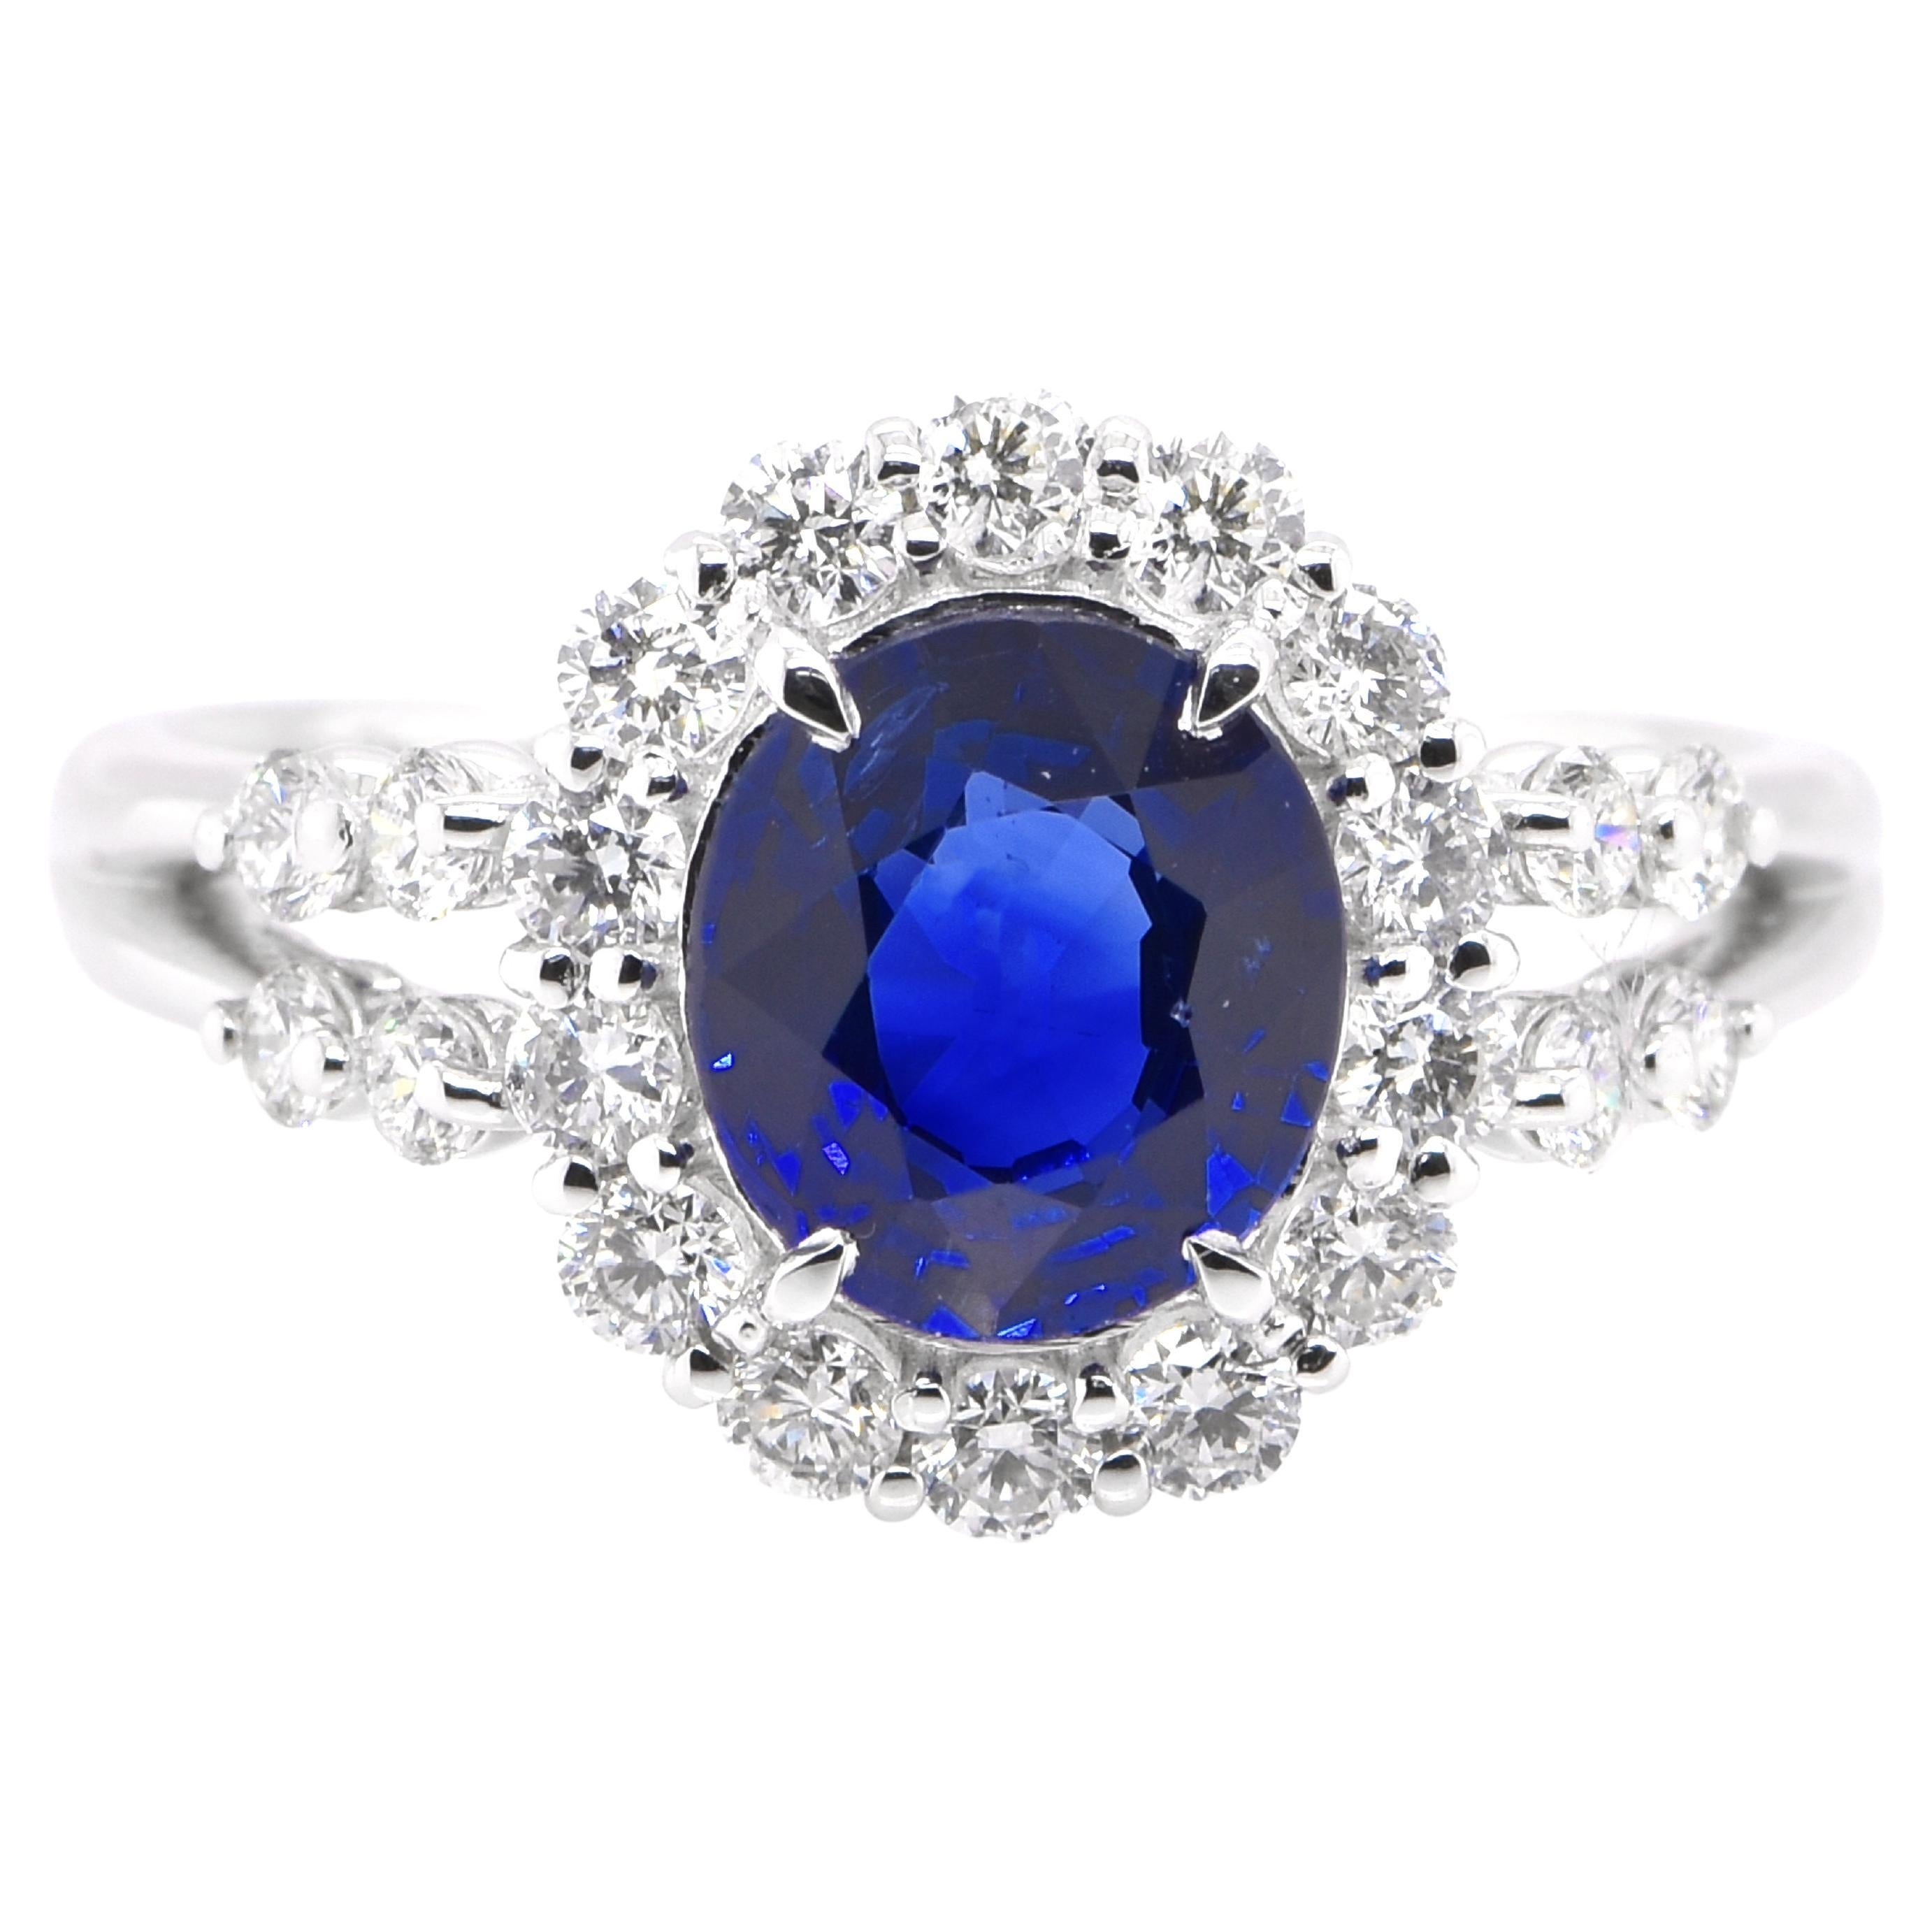 1.77 Carat Natural Madagascan Sapphire and Diamond Ring set in Platinum For Sale